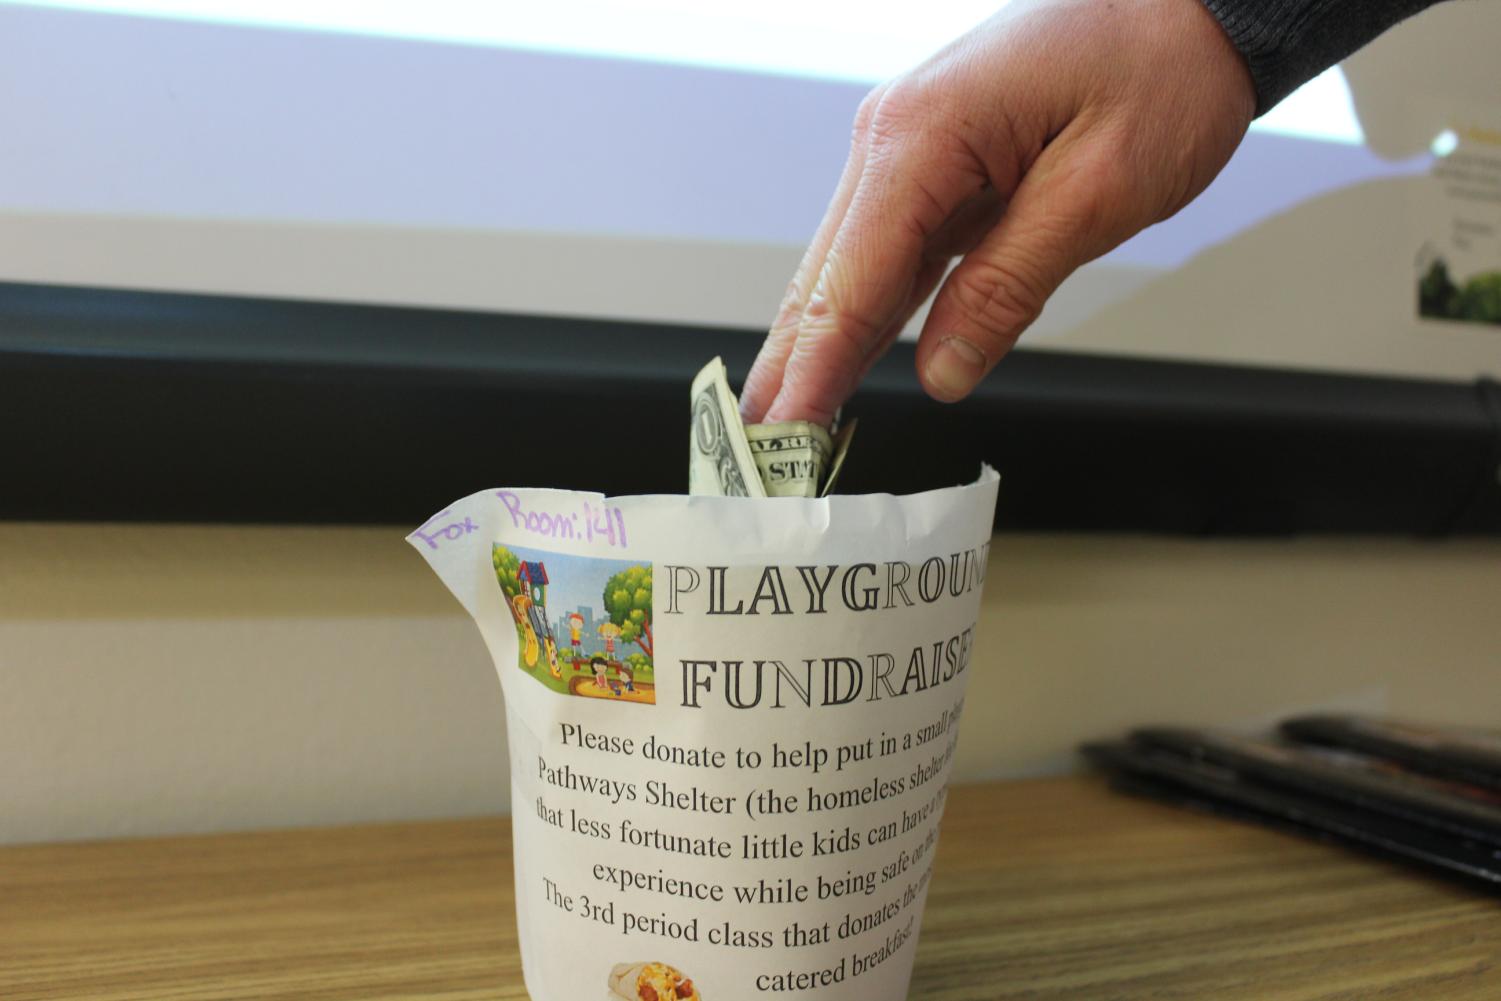 A student places money into one of the fundraiser buckets located throughout GJHS that will be used to build a playground at the Pathways Shelter. The fundraiser goes through Feb. 2.